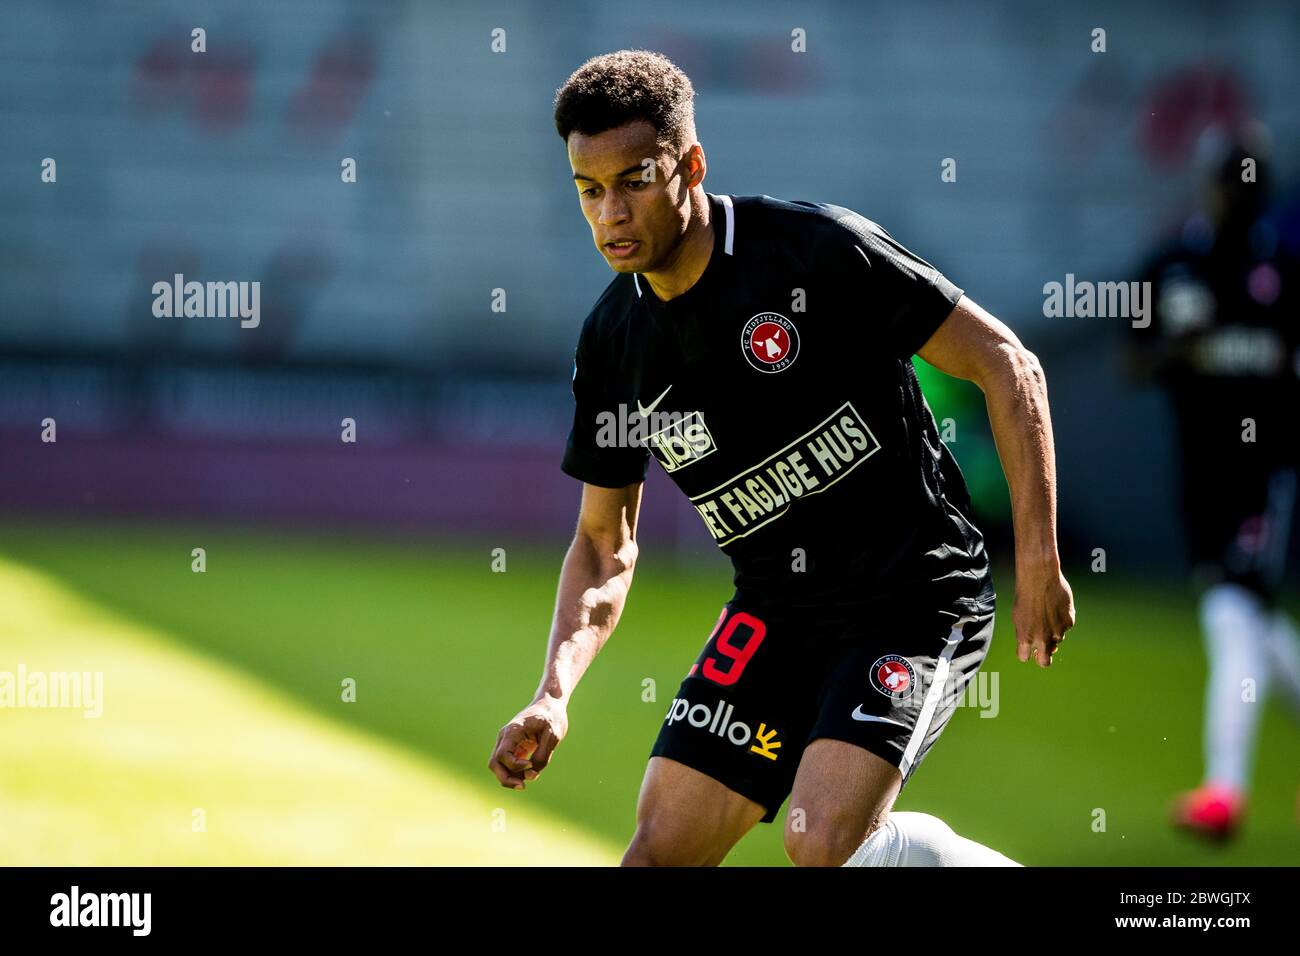 Herning, Denmark. 01st June, 2020. Paulinho (29) of FC Midtjylland seen during the 3F Superliga match between FC Midtjylland and AC Horsens at MCH Arena in Herning. (Photo Gonzales Photo/Alamy Live